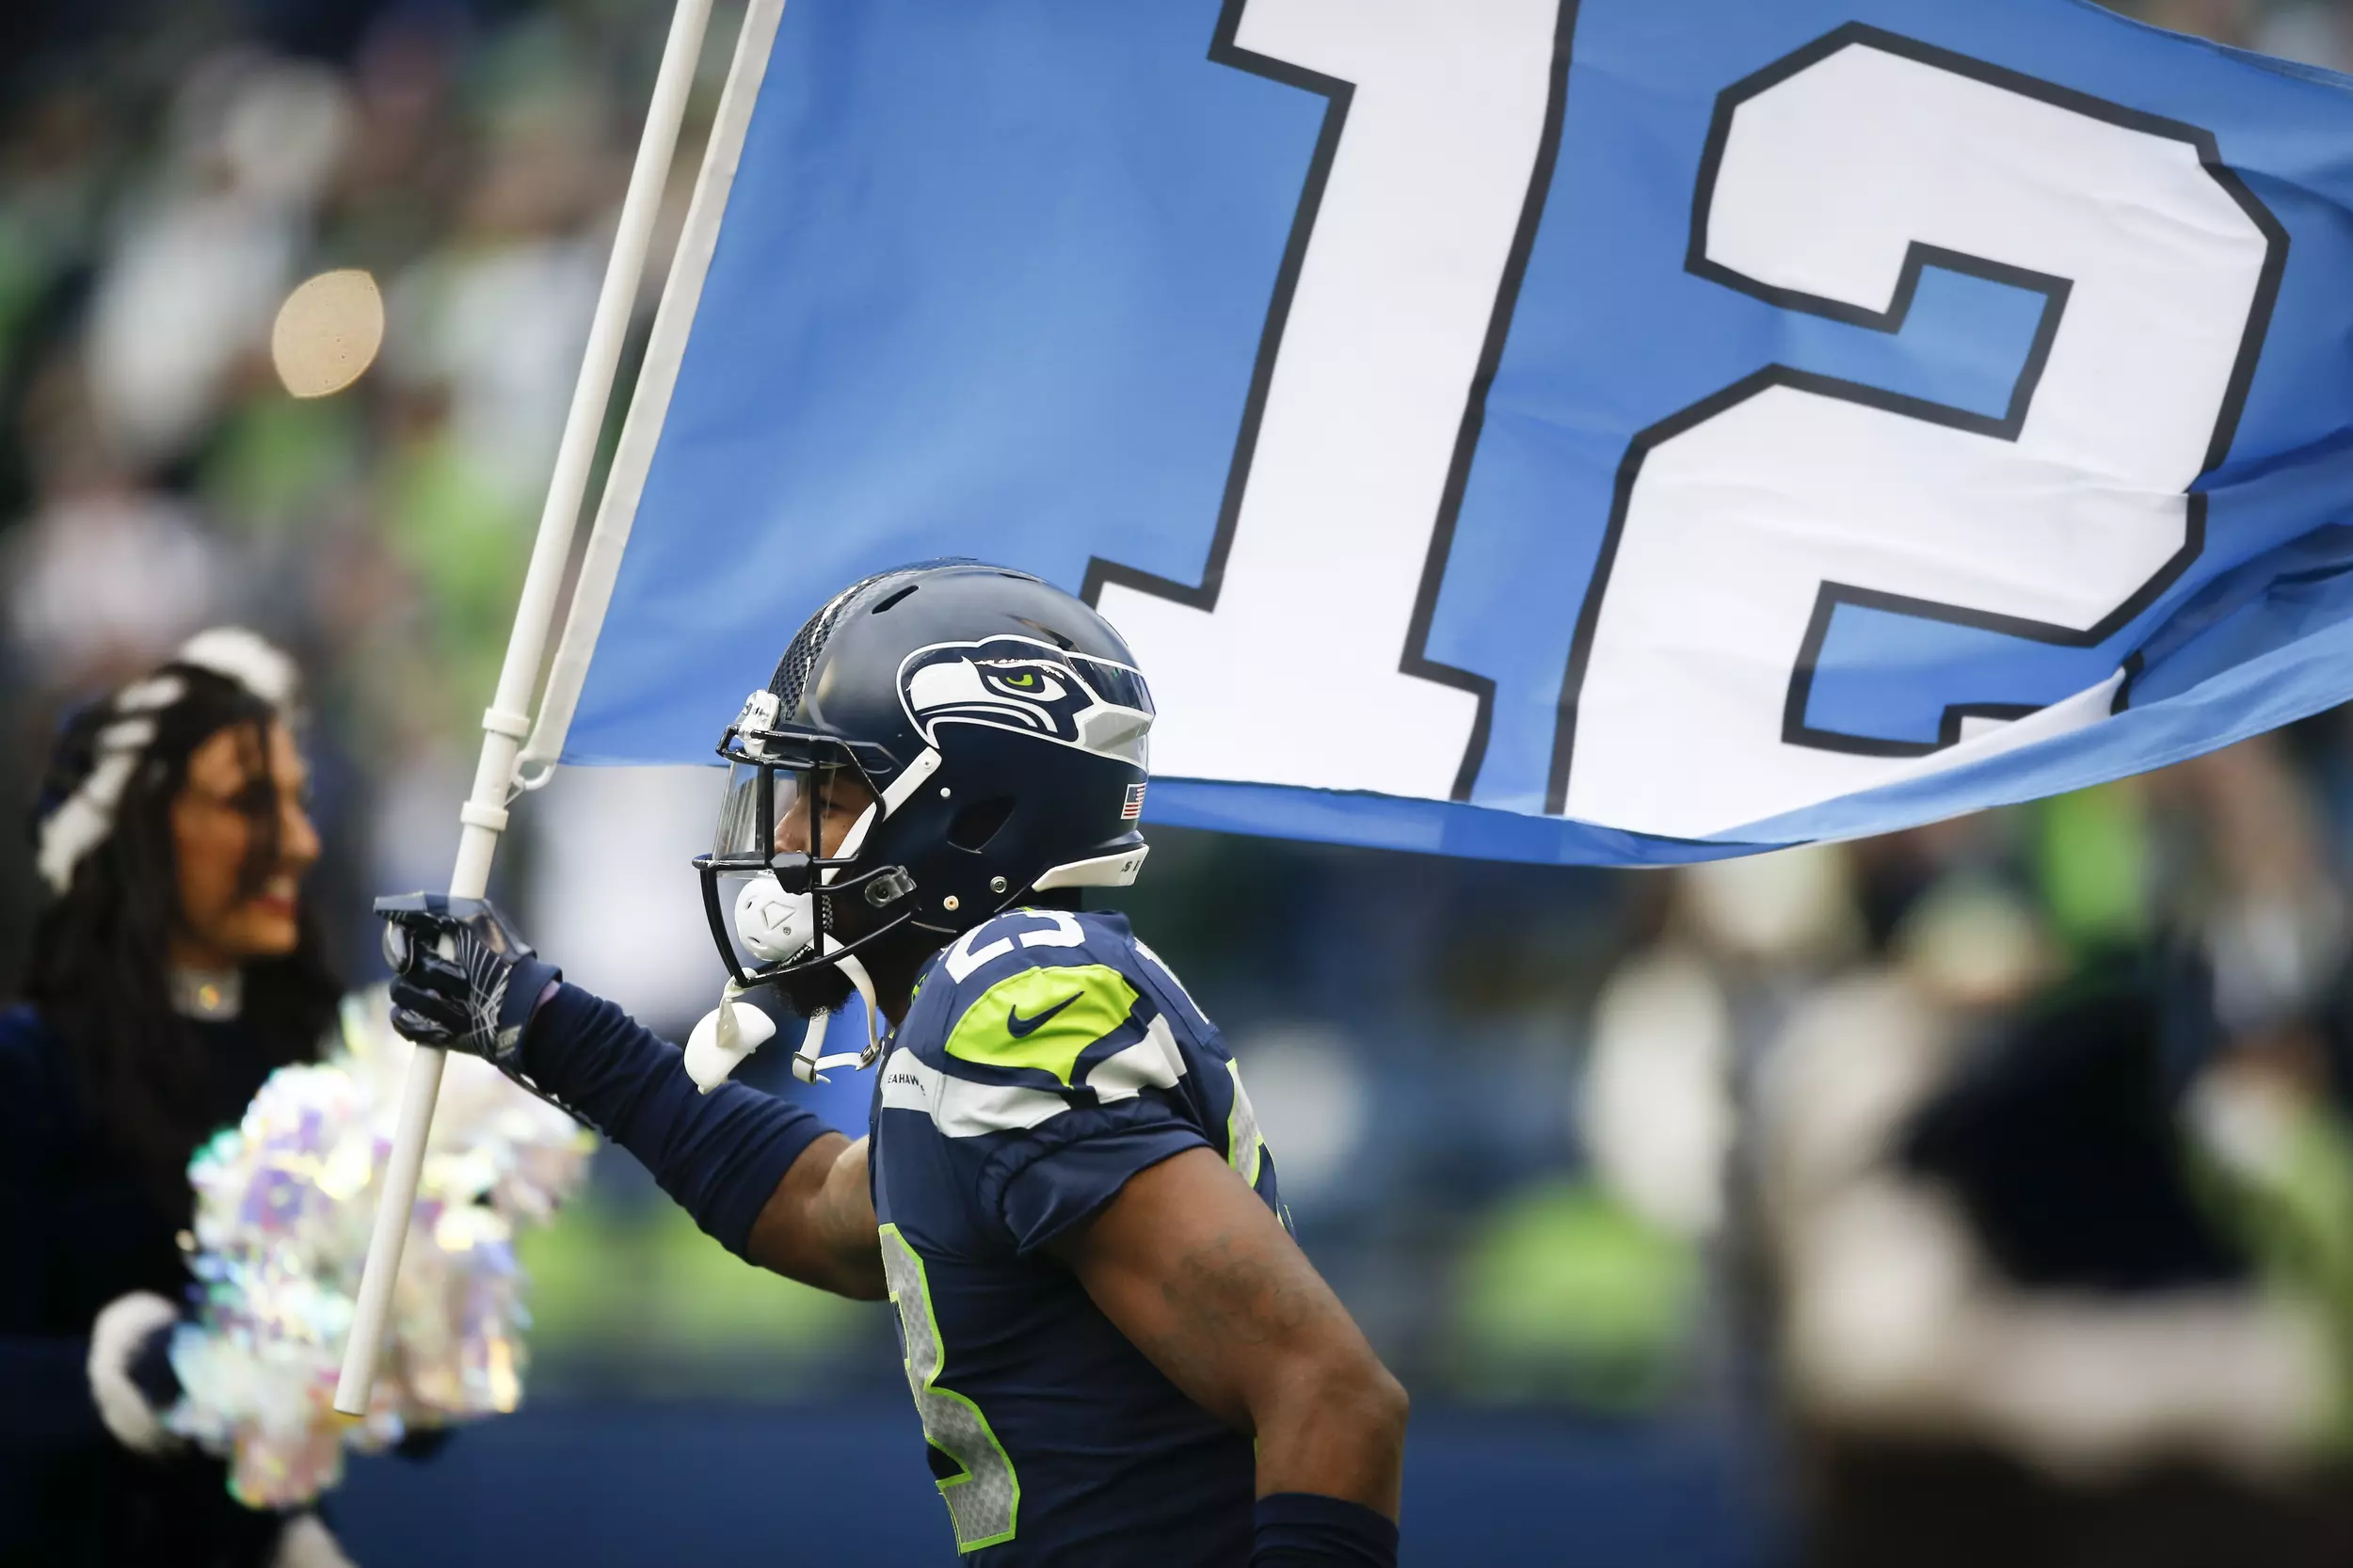 Ranked: How Popular is Every Seattle Seahawks Uniform?